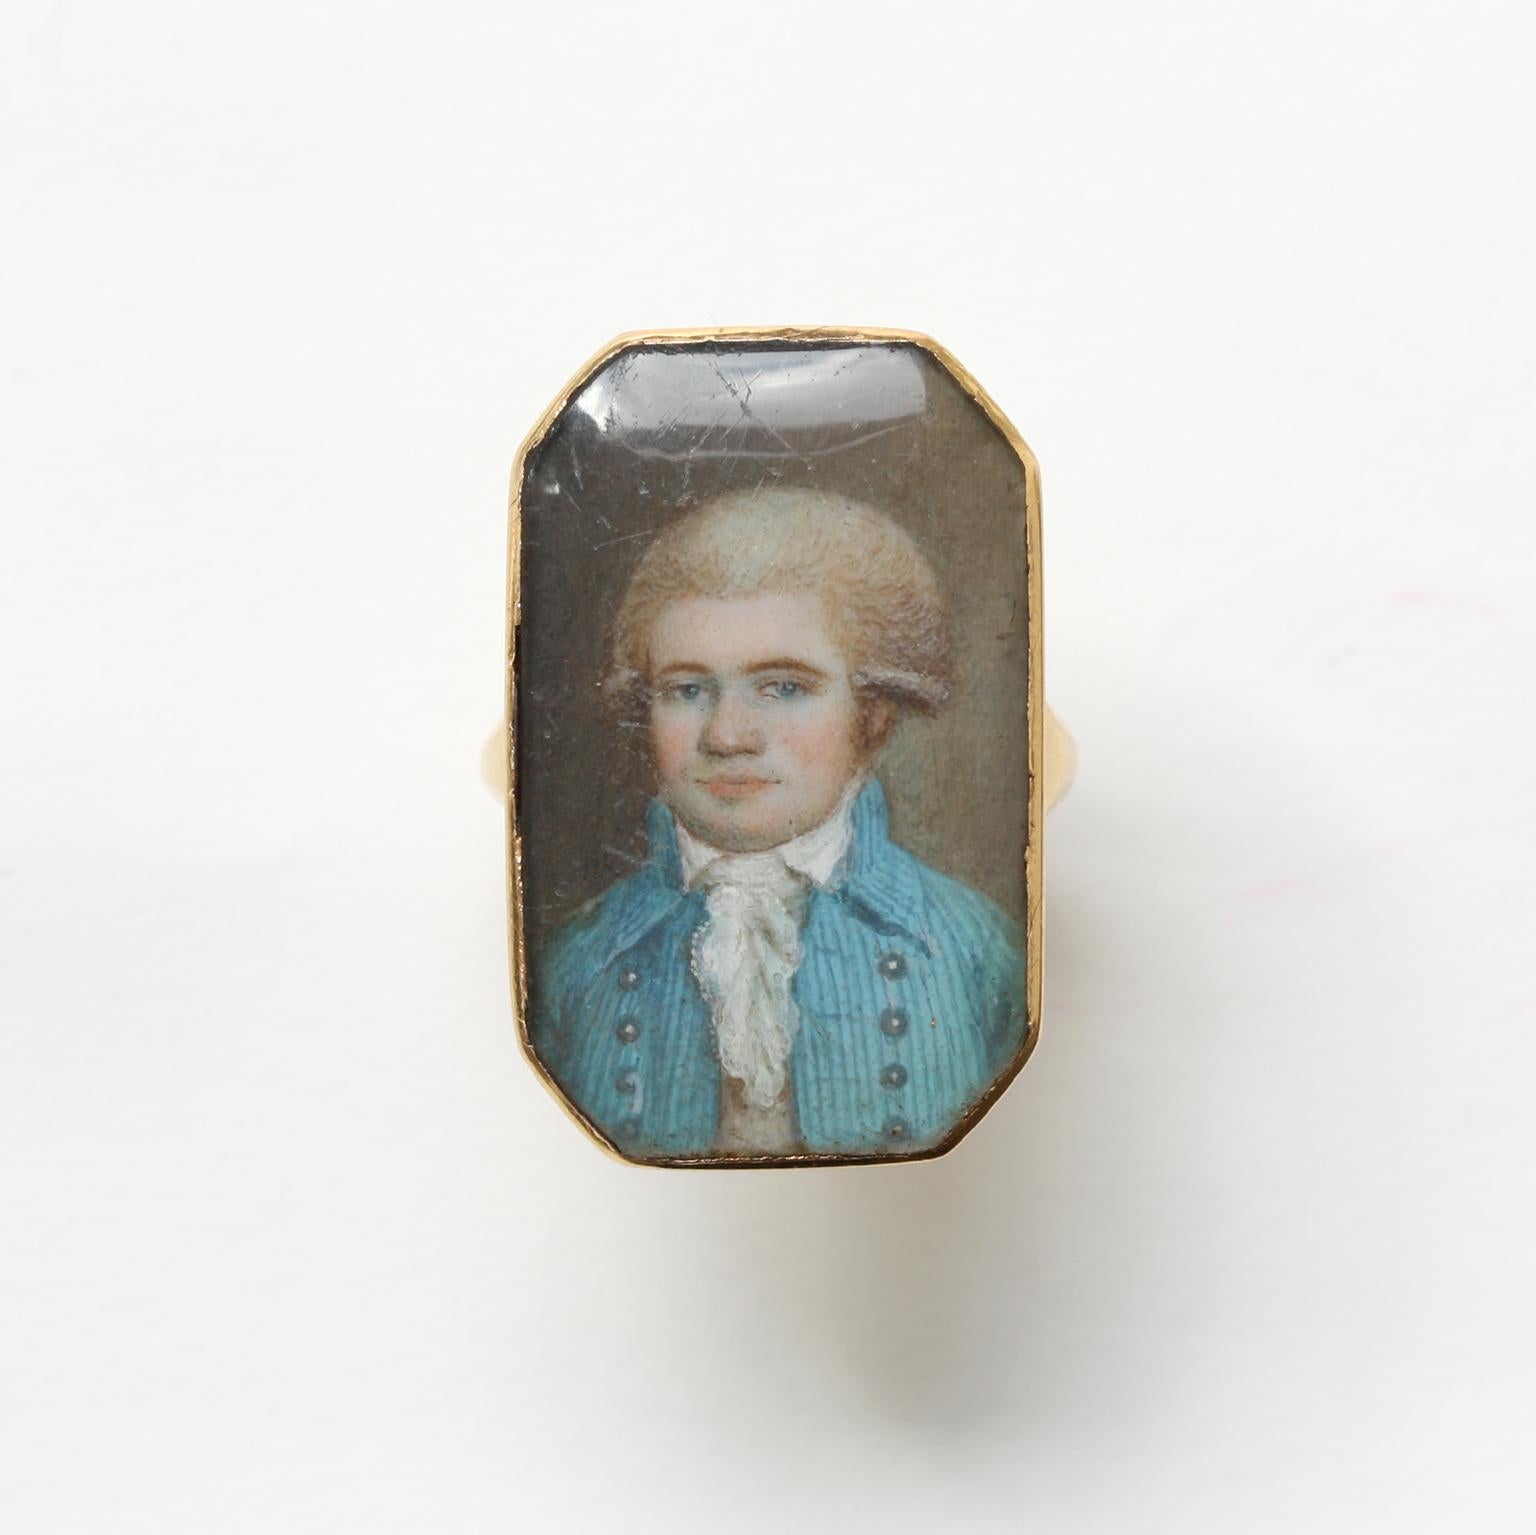 An 18th century octagonal gold ring featuring a glassed portrait of a young man wearing a wig and a pretty blue and white striped jacket, circa 1790, English or France.

ring size: 17+ mm / 6 ¾ US
weight: 5.74 grams
dimensions portrait: 2.6 x 2.1 cm